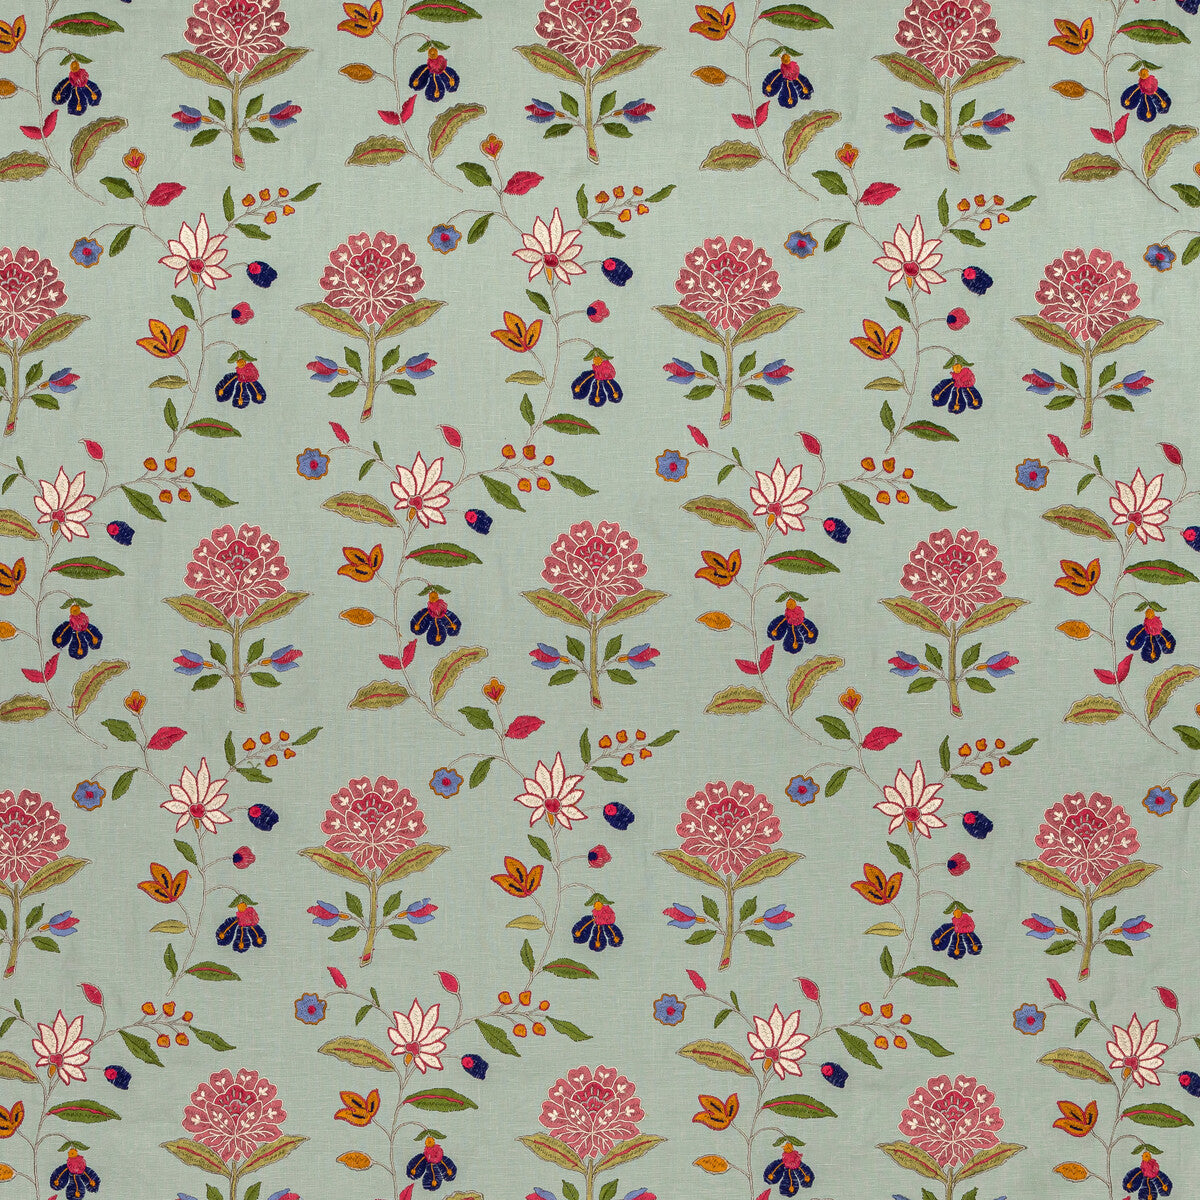 Kalla fabric in pink/green color - pattern BFC-3693.73.0 - by Lee Jofa in the Blithfield collection